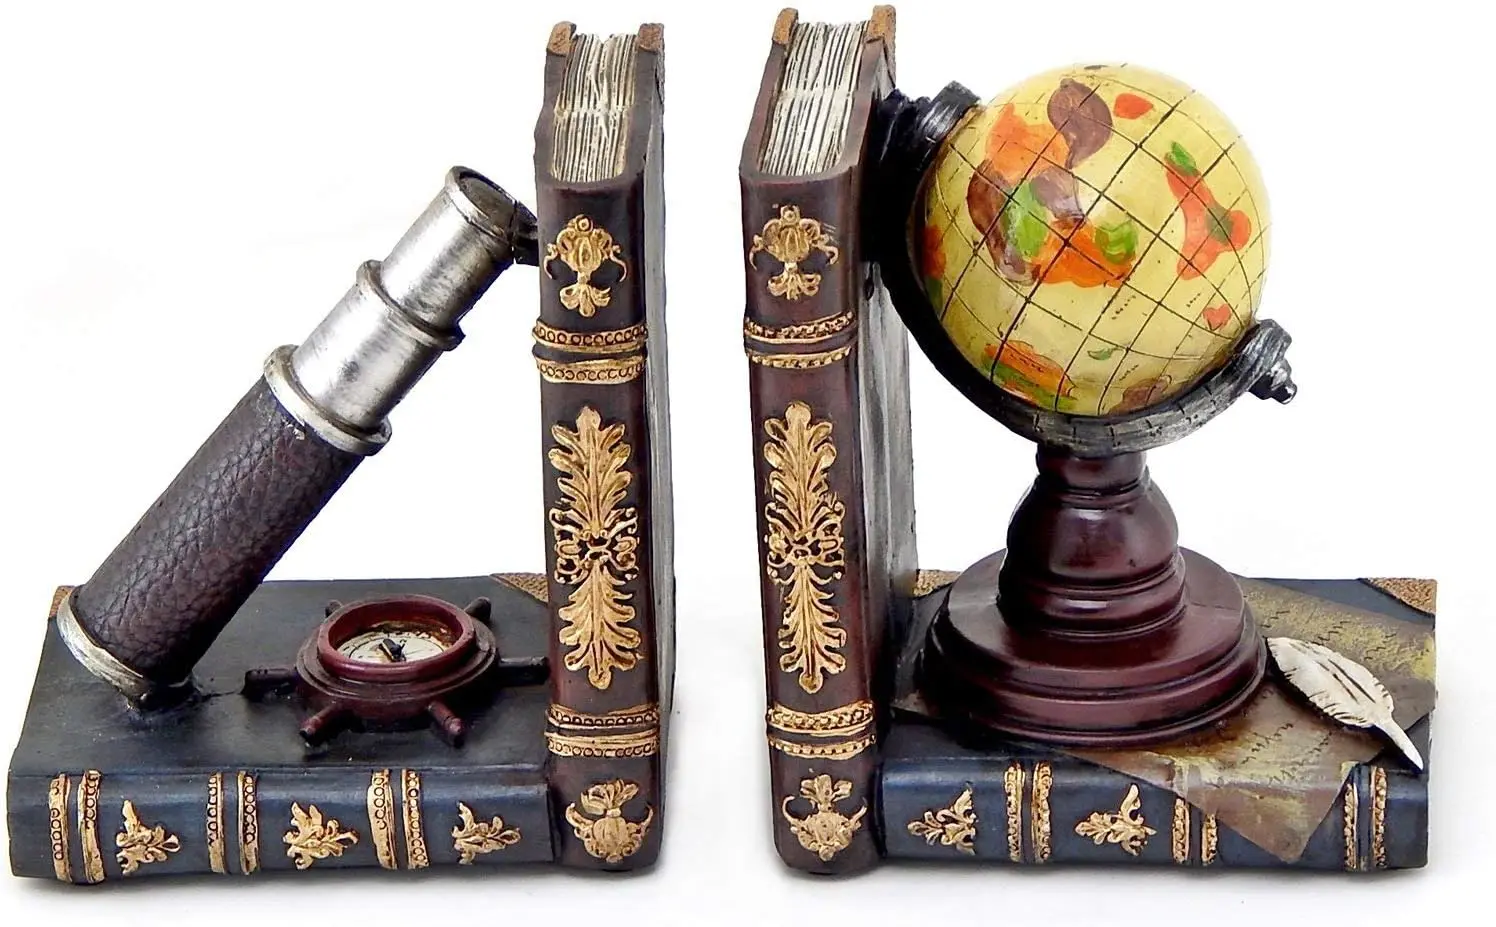 

Decorative Bookends Vintage Telescope Book Ends Support Antiques Pirate Old World Nautical Farmhouse Country Cottage Home Deco